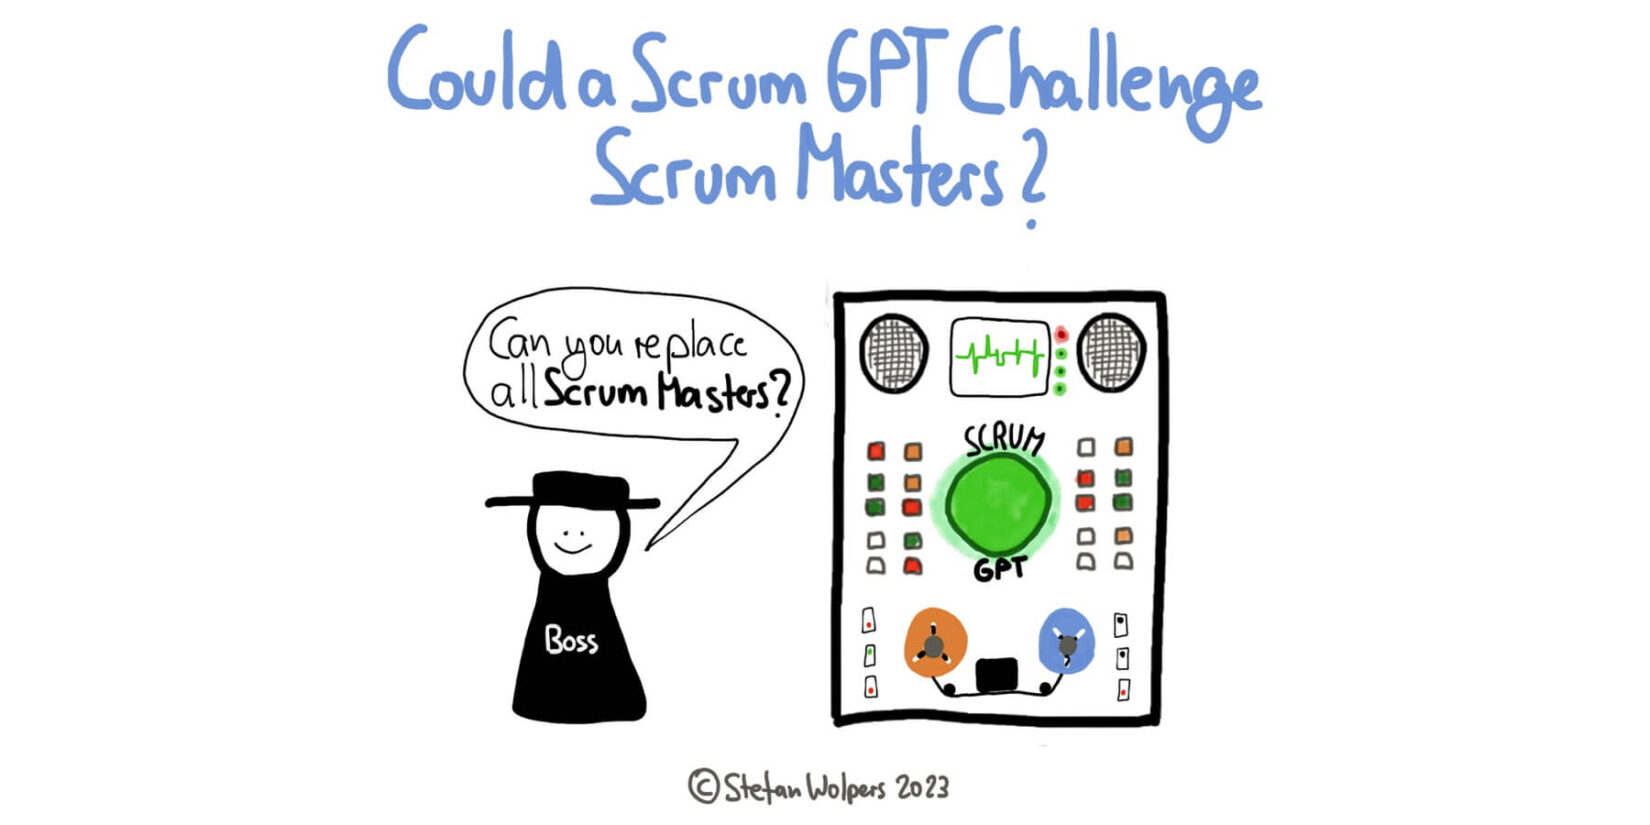 Could a Scrum GPT Challenge Scrum Masters? Age-of-Product.com